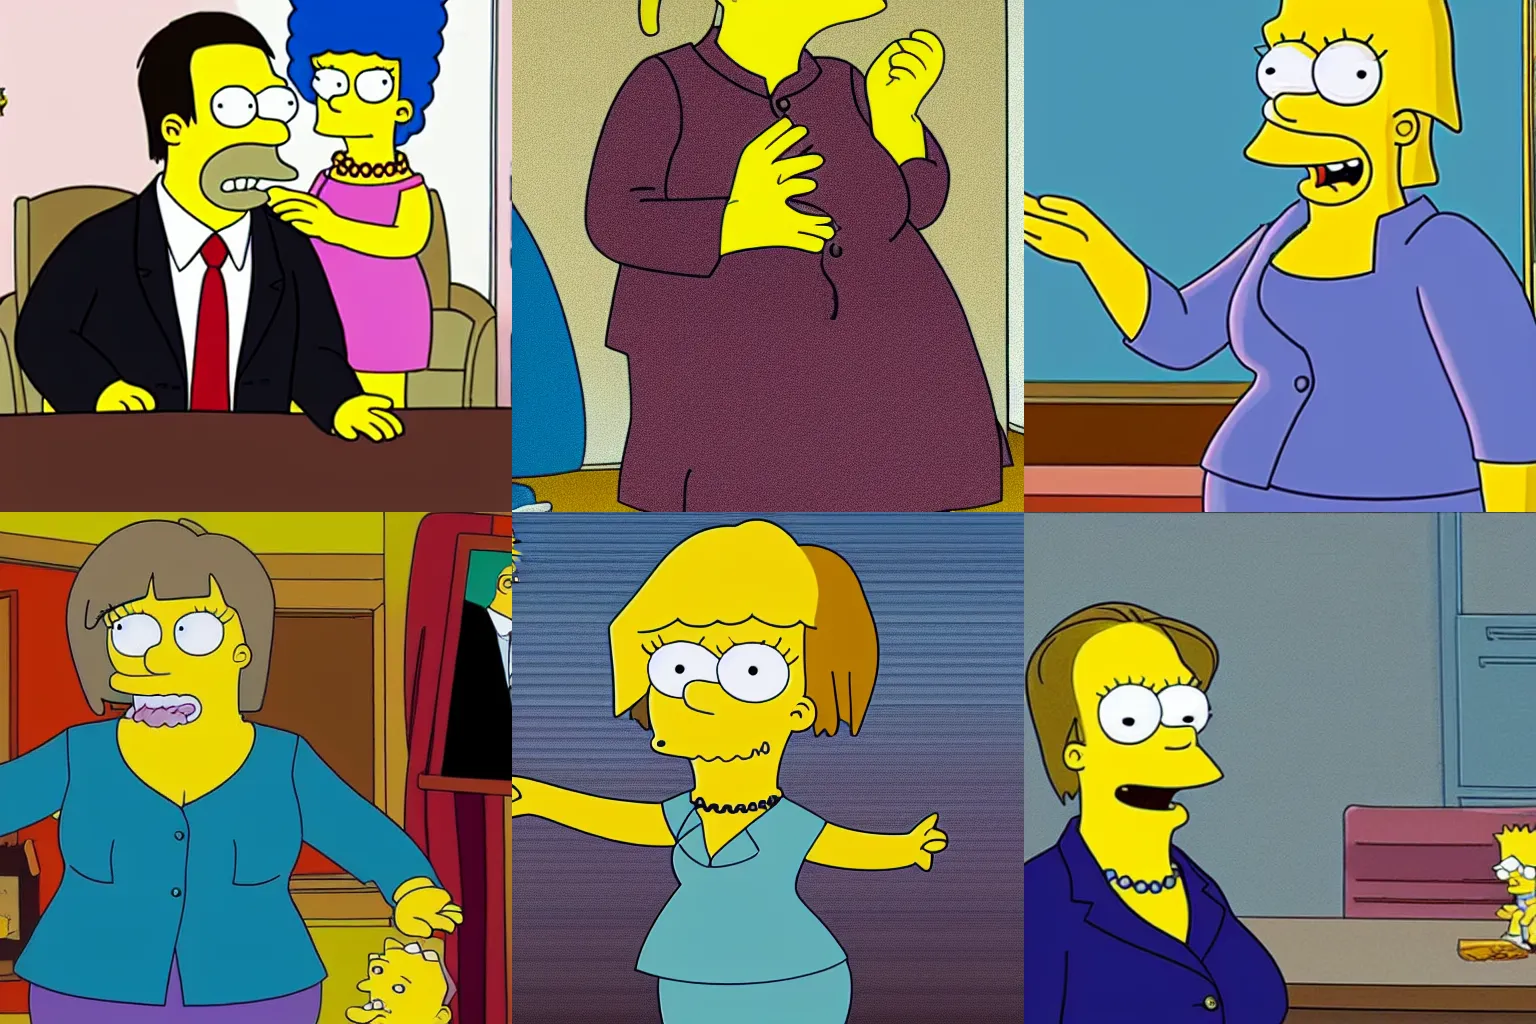 Prompt: a still from Angela Merkel in the Simpsons